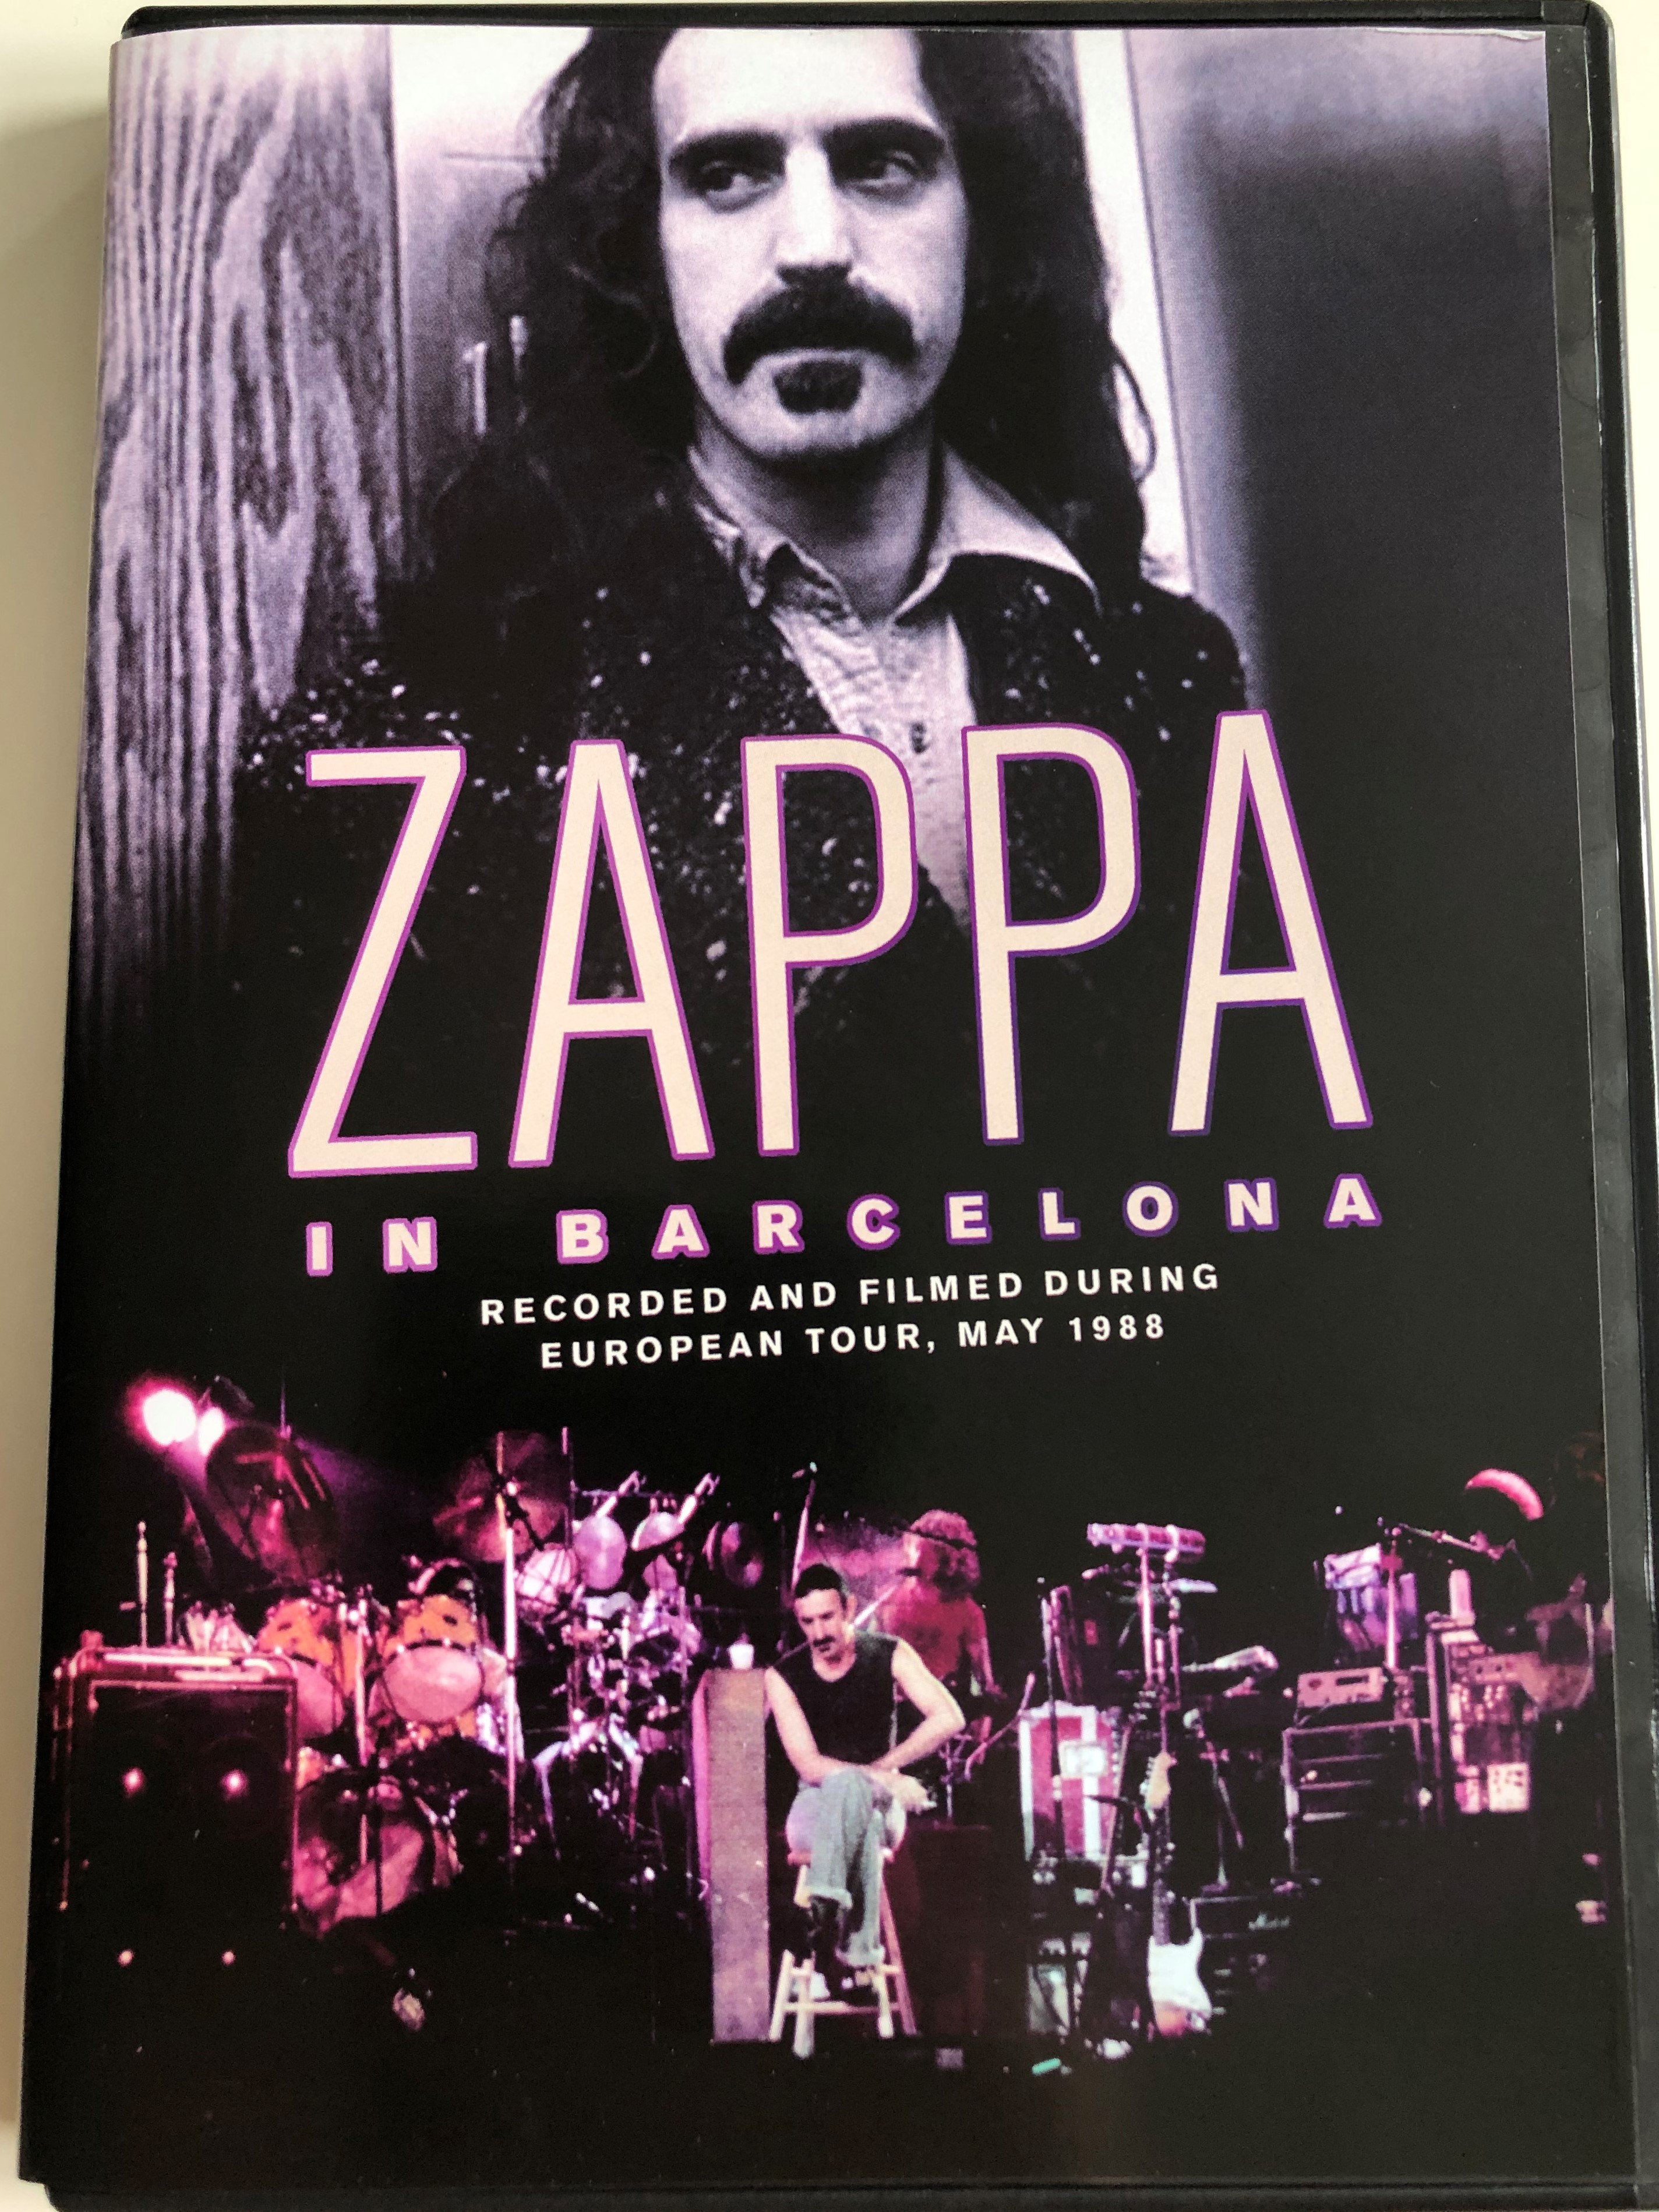 zappa-in-barcelona-dvd-2007-recorded-and-filmed-during-european-tour-may-1988-sharleena-black-napkins-any-kind-of-pain-sofa-love-of-my-life-masterplan-1-.jpg